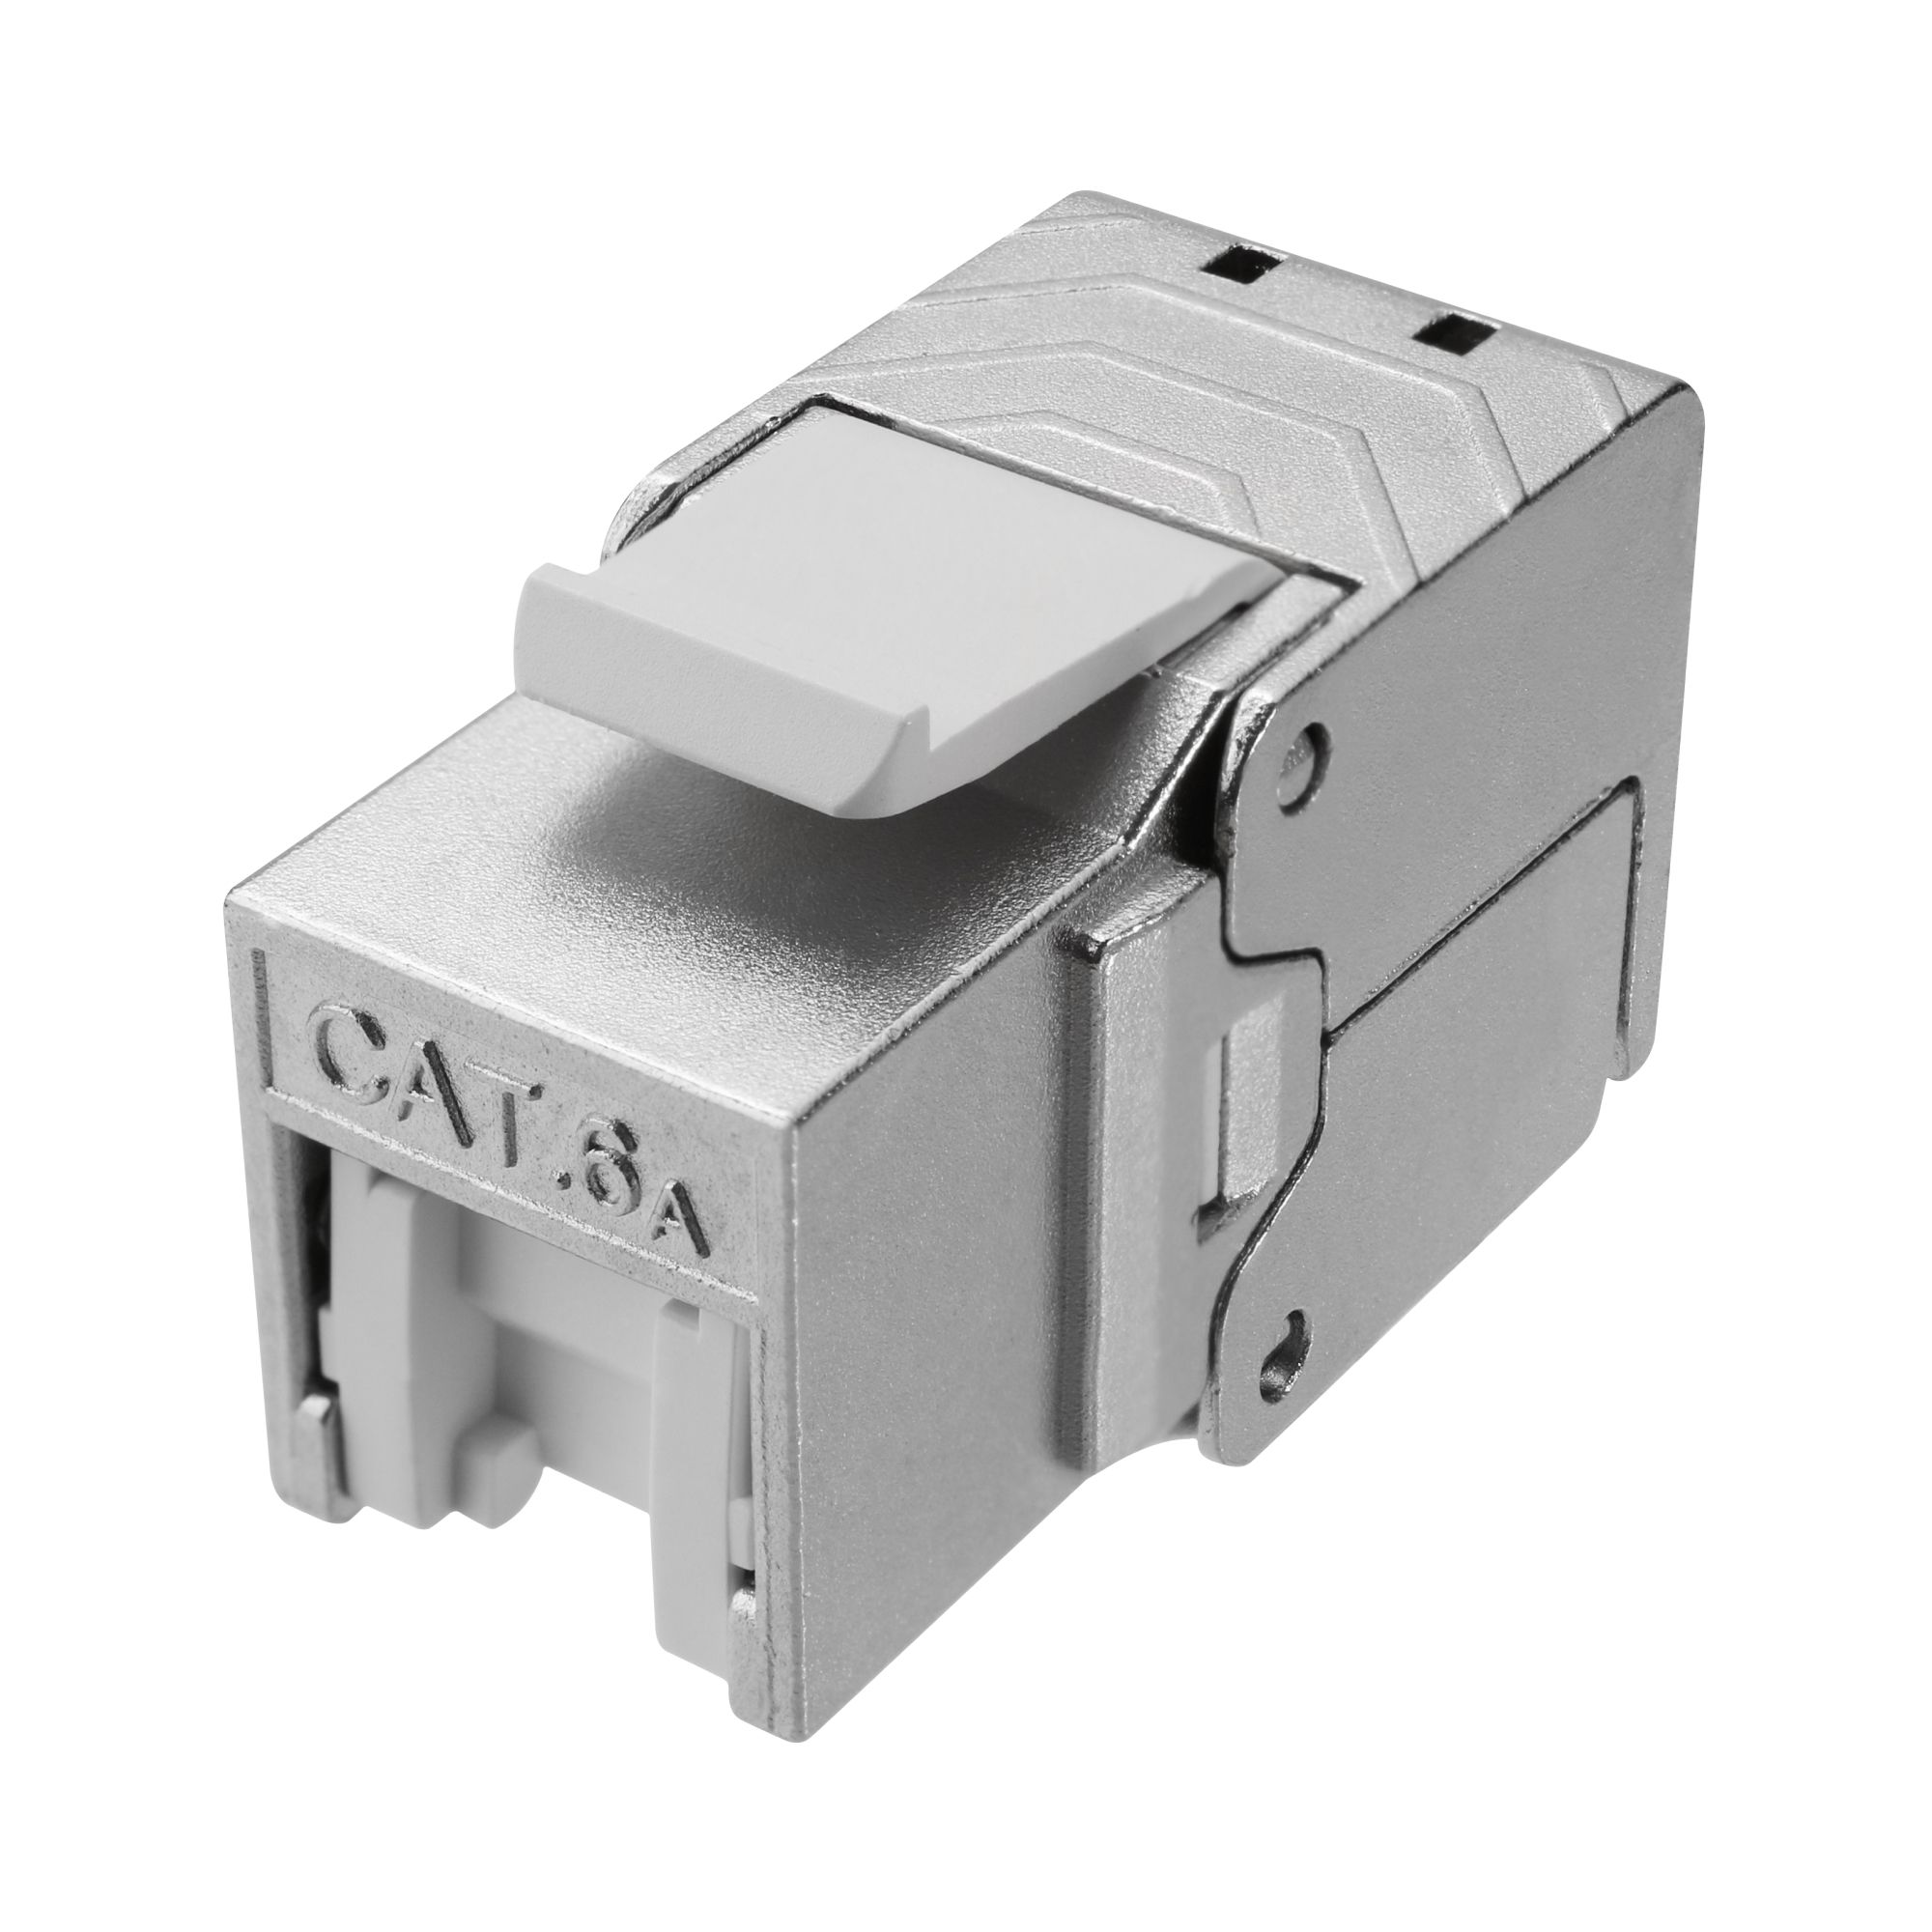 CAT6A/Cat7 Shielded RJ45 Connector Nickel Plated Modular Plug for